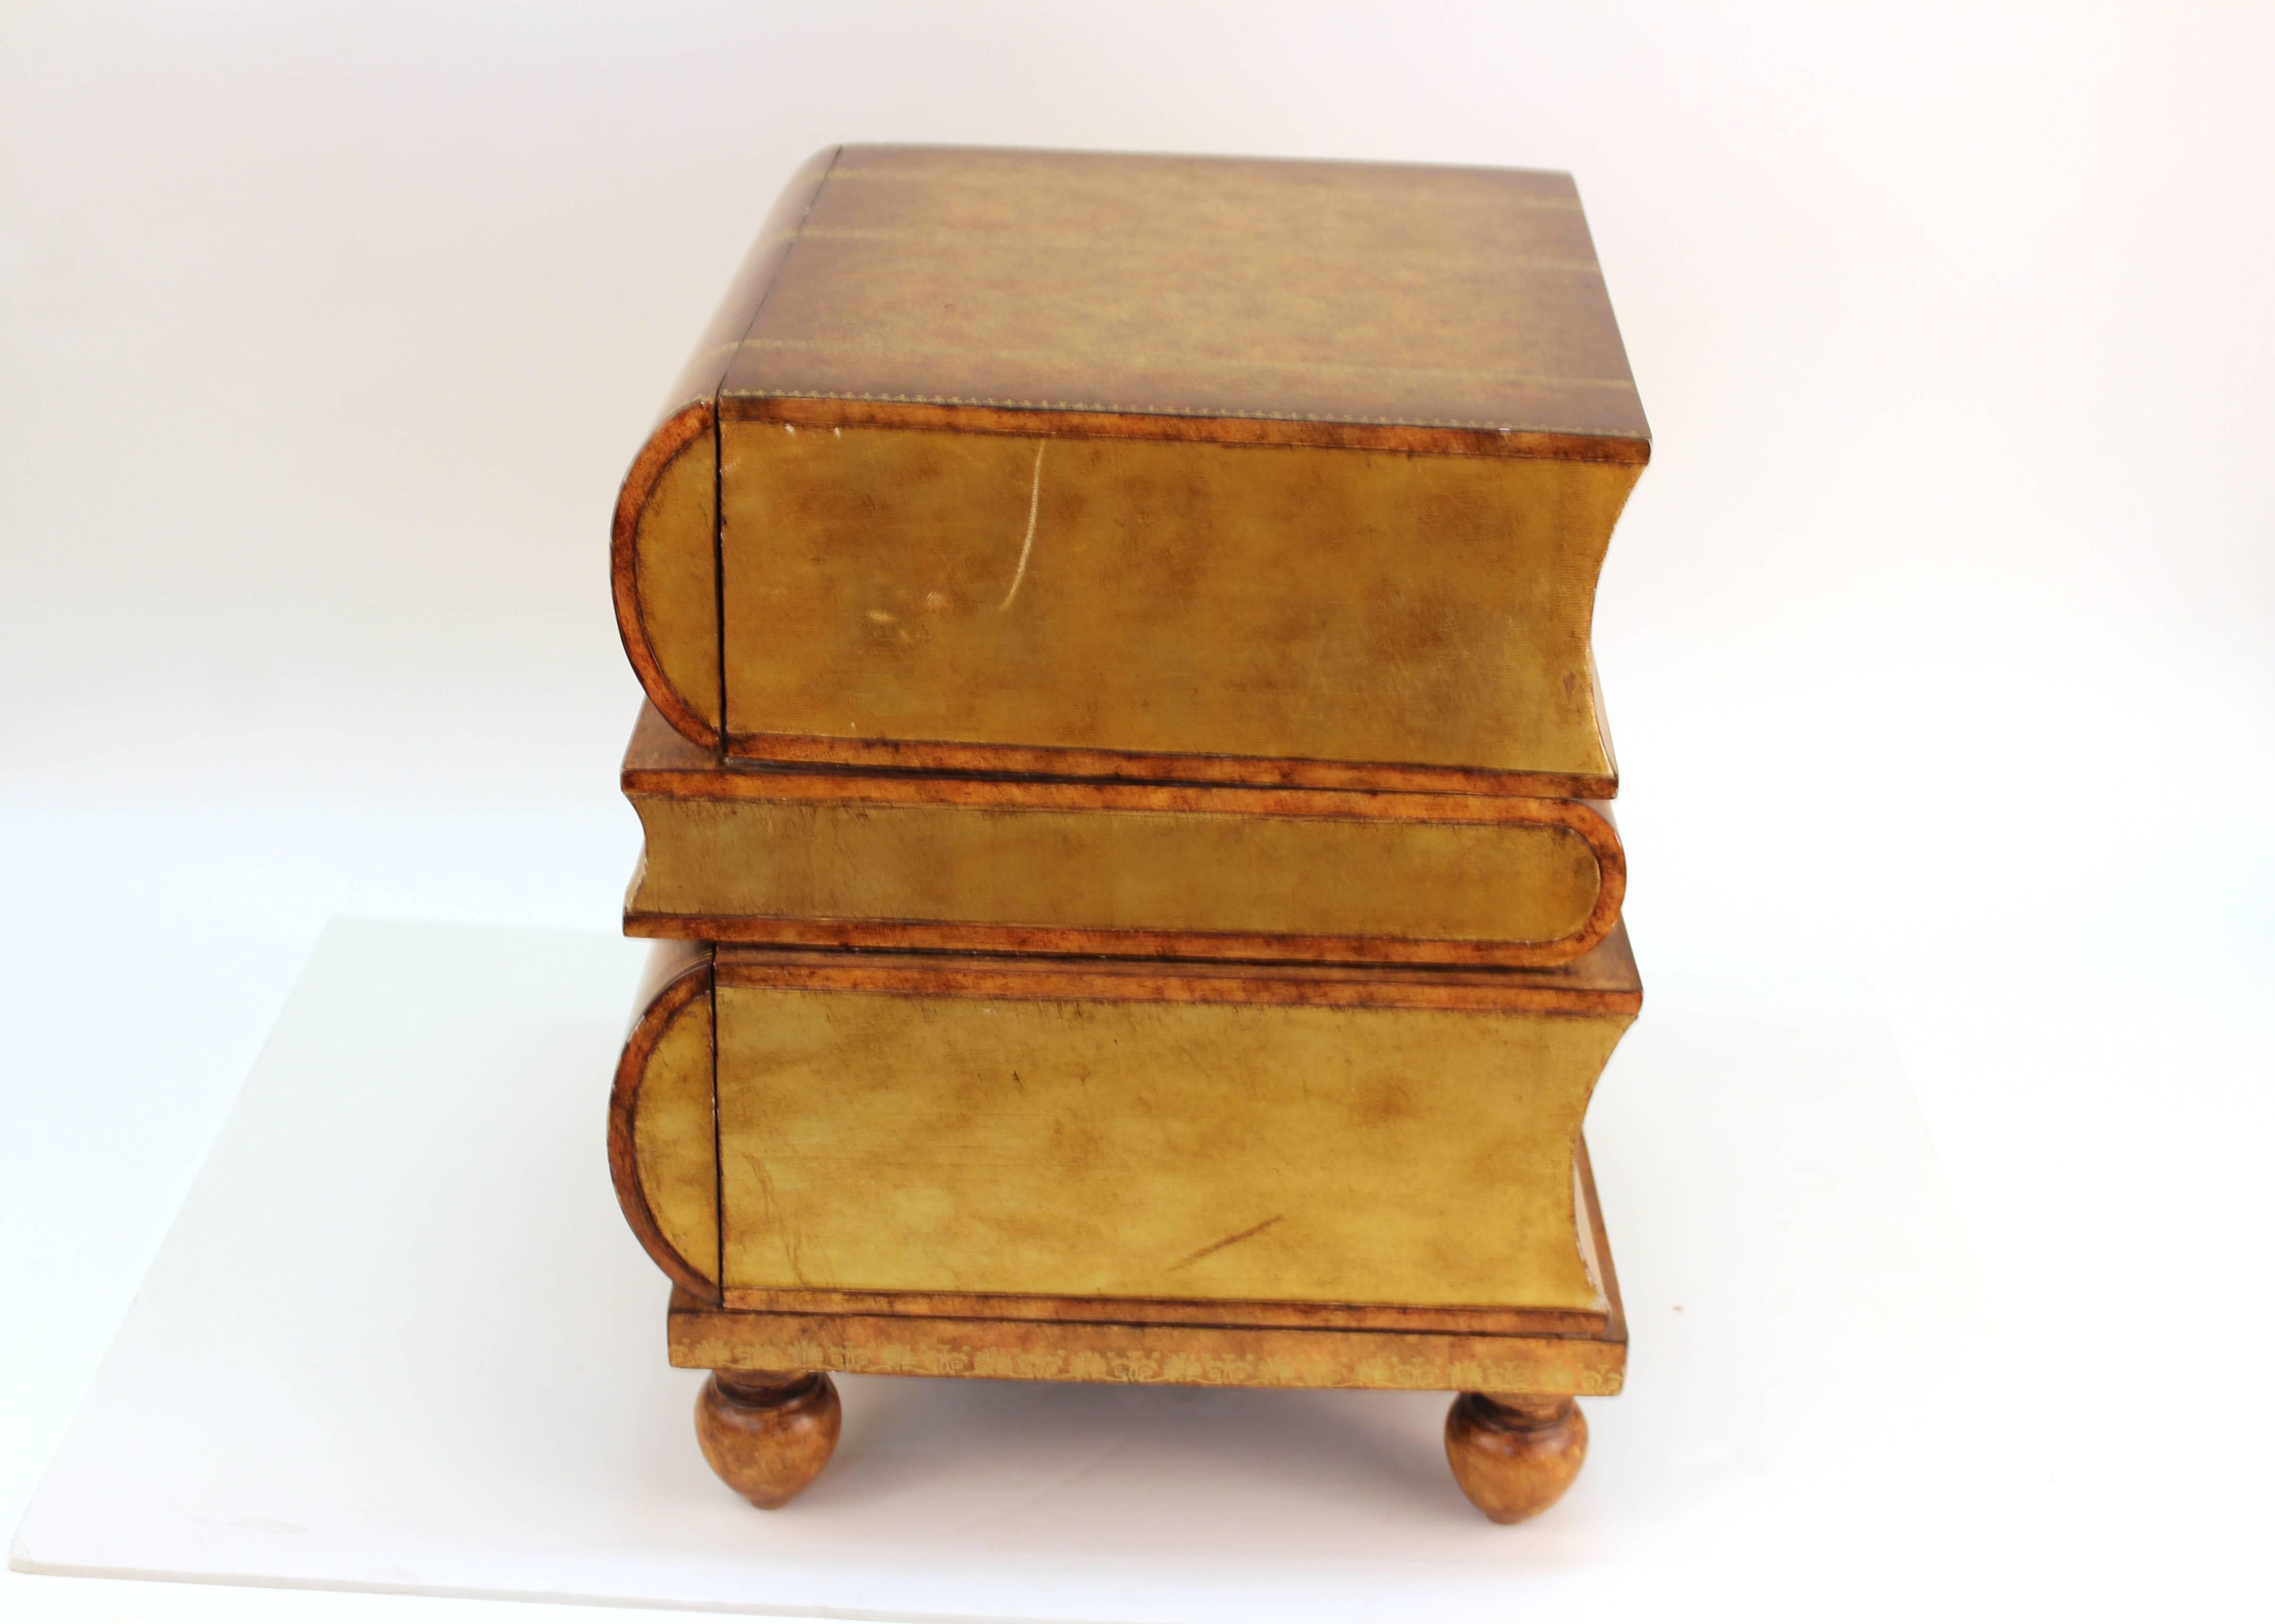 Maitland Smith side table designed to look like a stack of books titled 'The History of Furniture'. Features two hidden drawers and a faux finish to look like leather and paper. The piece stands on four spherical legs. Includes the original logo